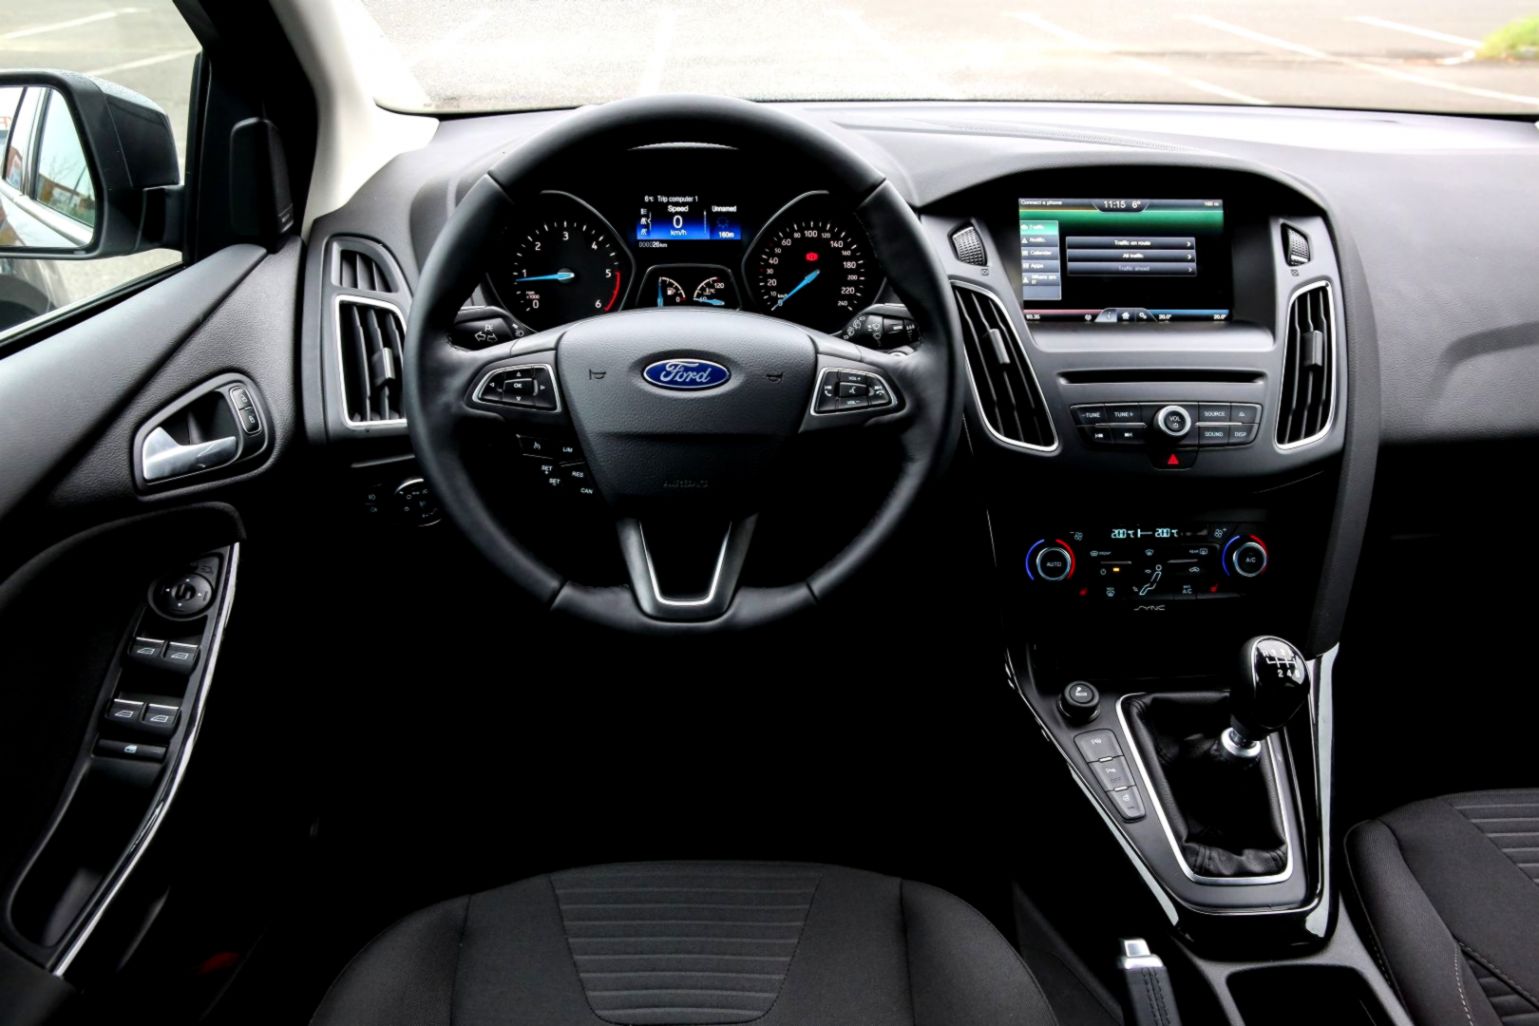 Ford Focus Mk3 Interior Dimensions Ford Focus Review